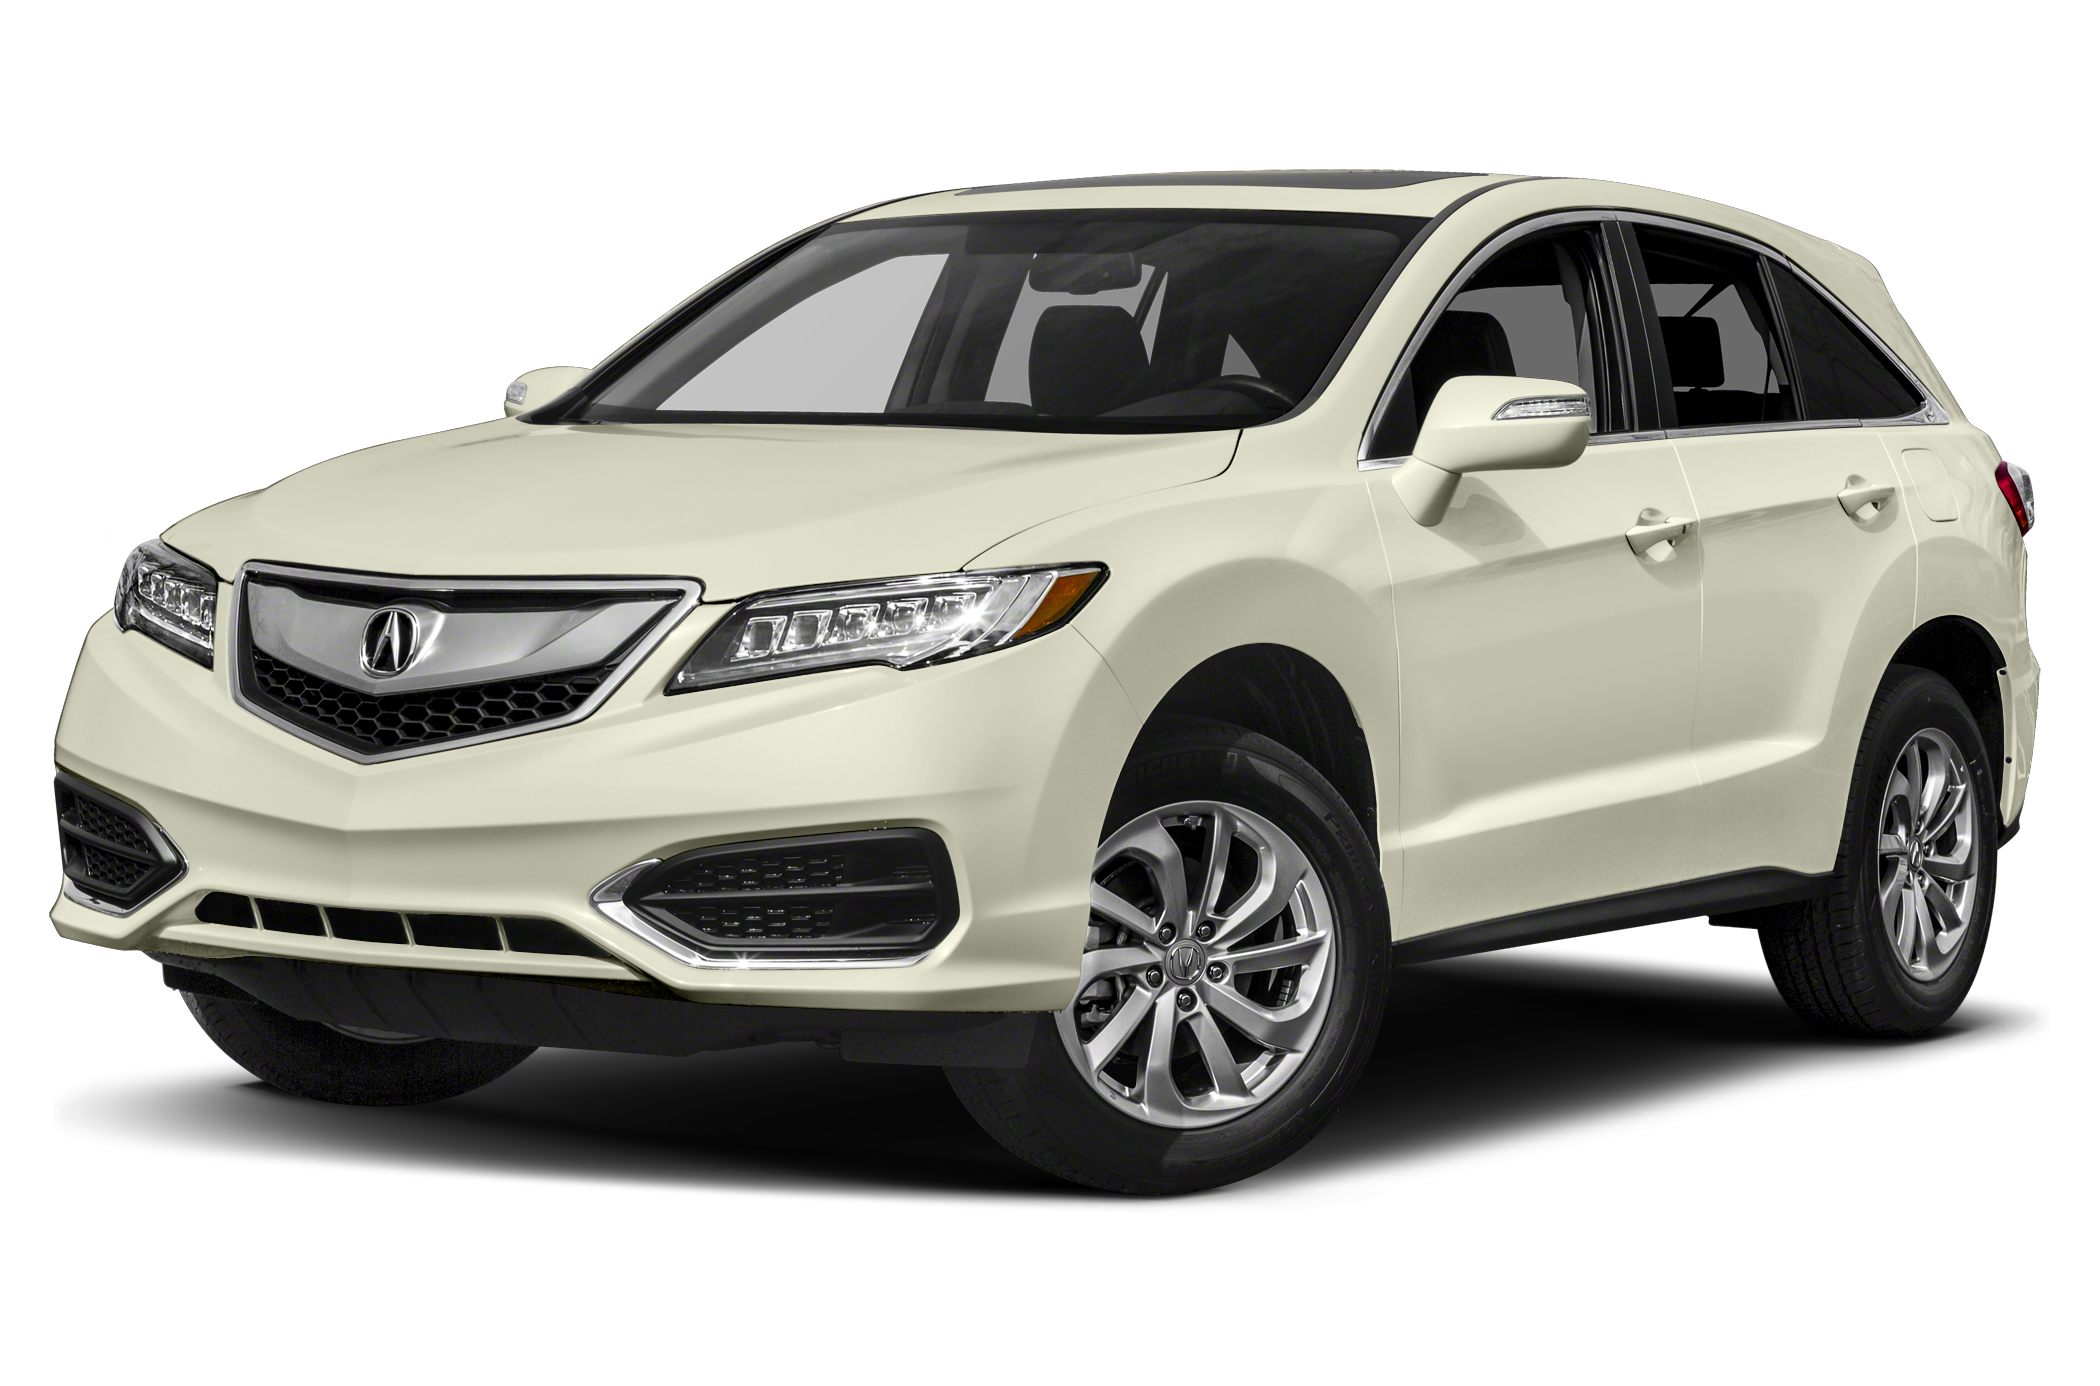 2013 Acura RDX gets more of the good stuff - Autoblog